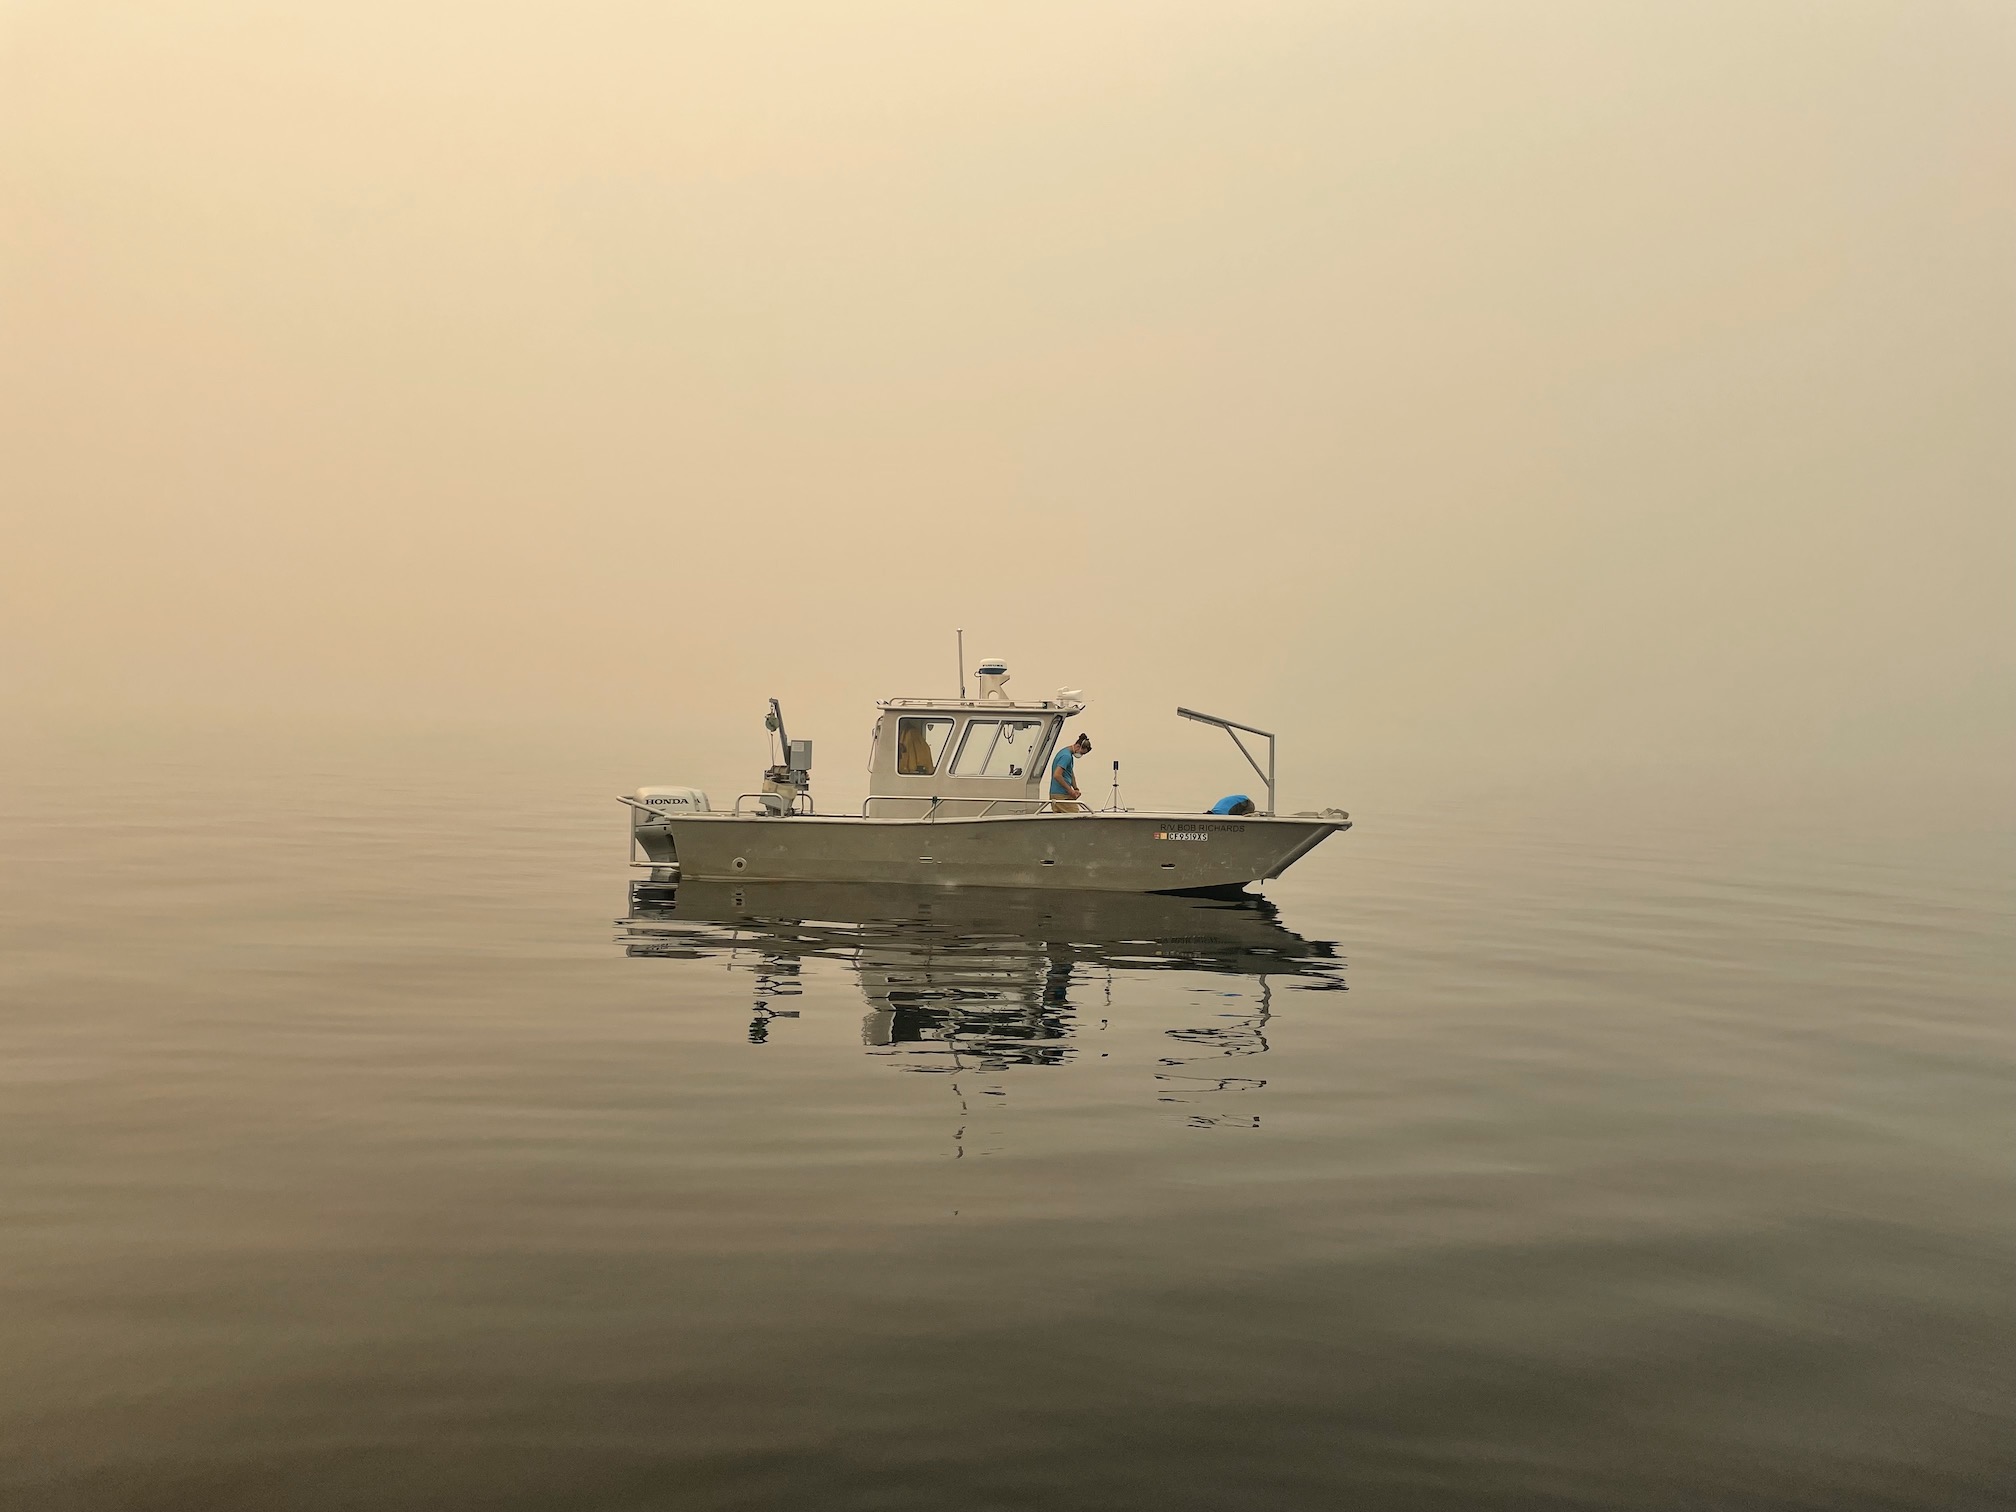 A reseach boat sits on Lake Tahoe duriign heavy beige smoke as scientists sample the water from the boat